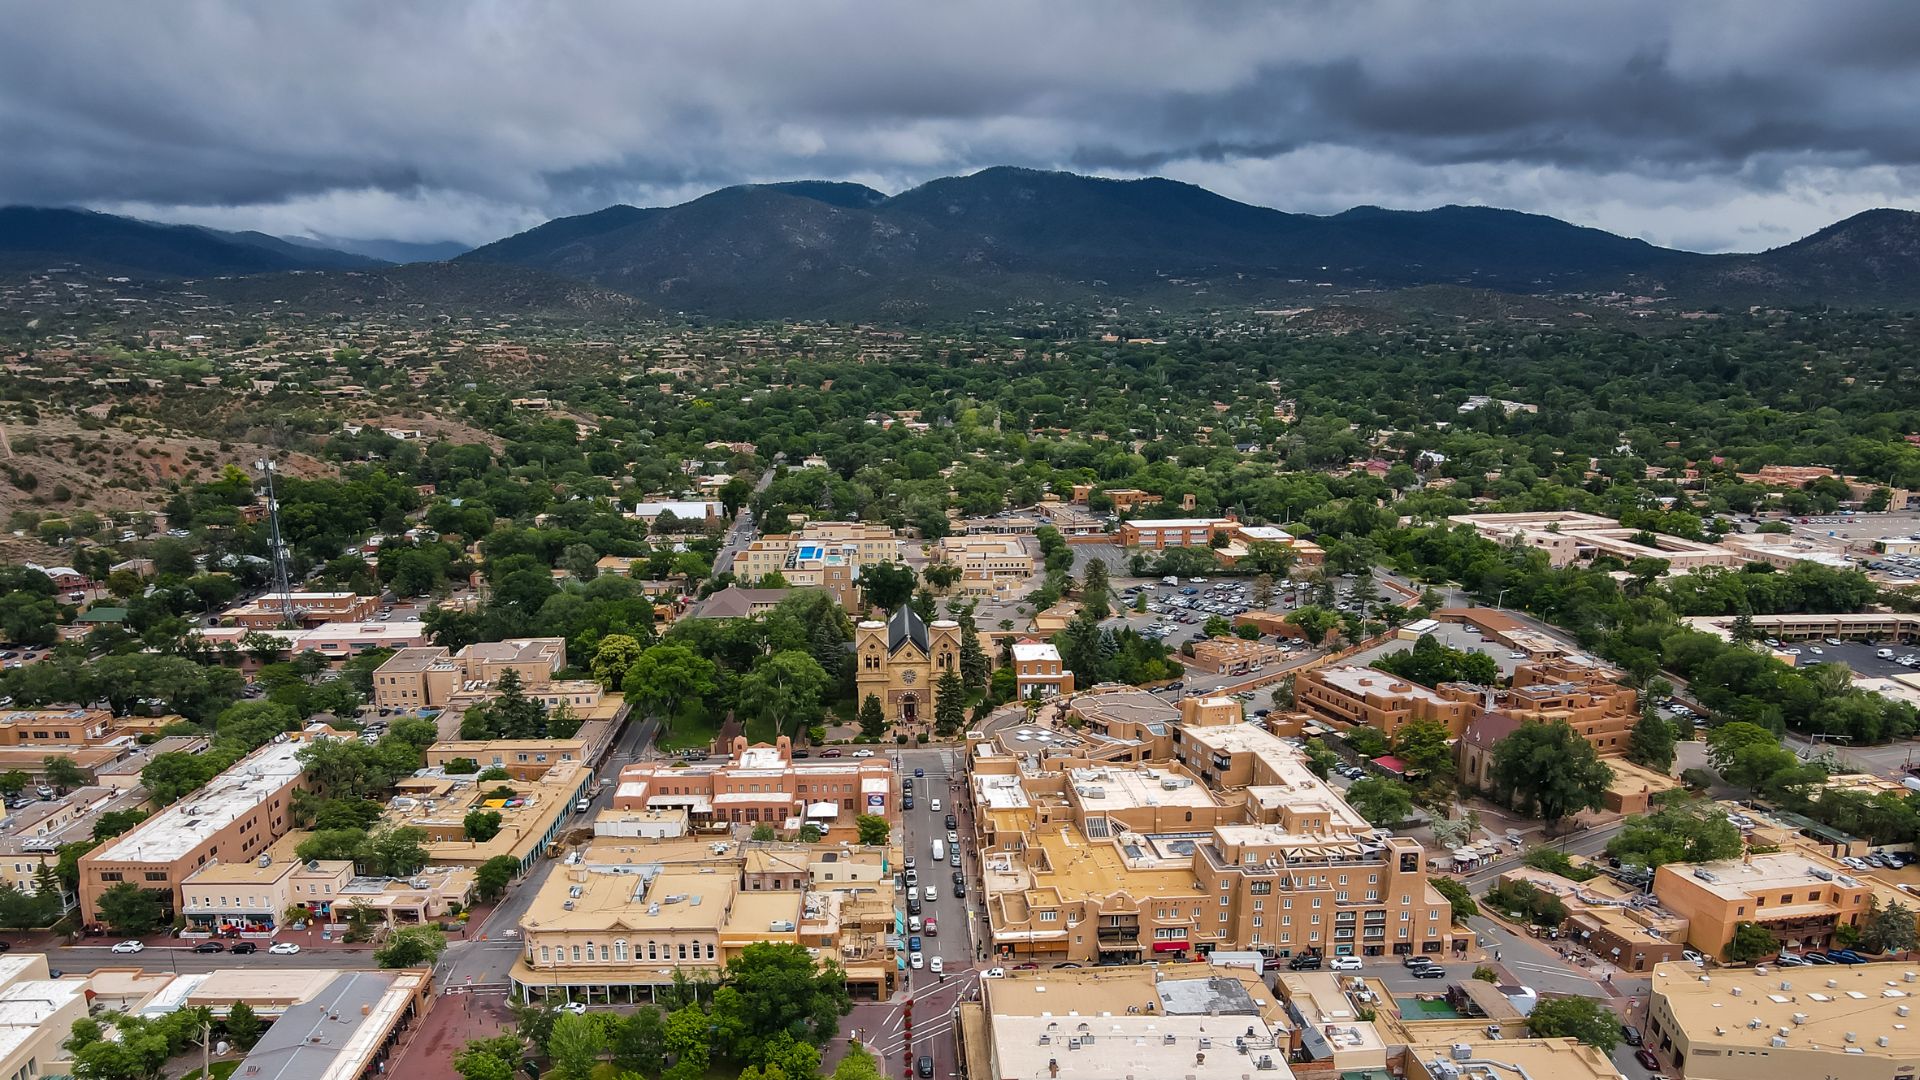 Aerial view of Santa Fe with grids of streets, adobe buildings, and mountains in the background